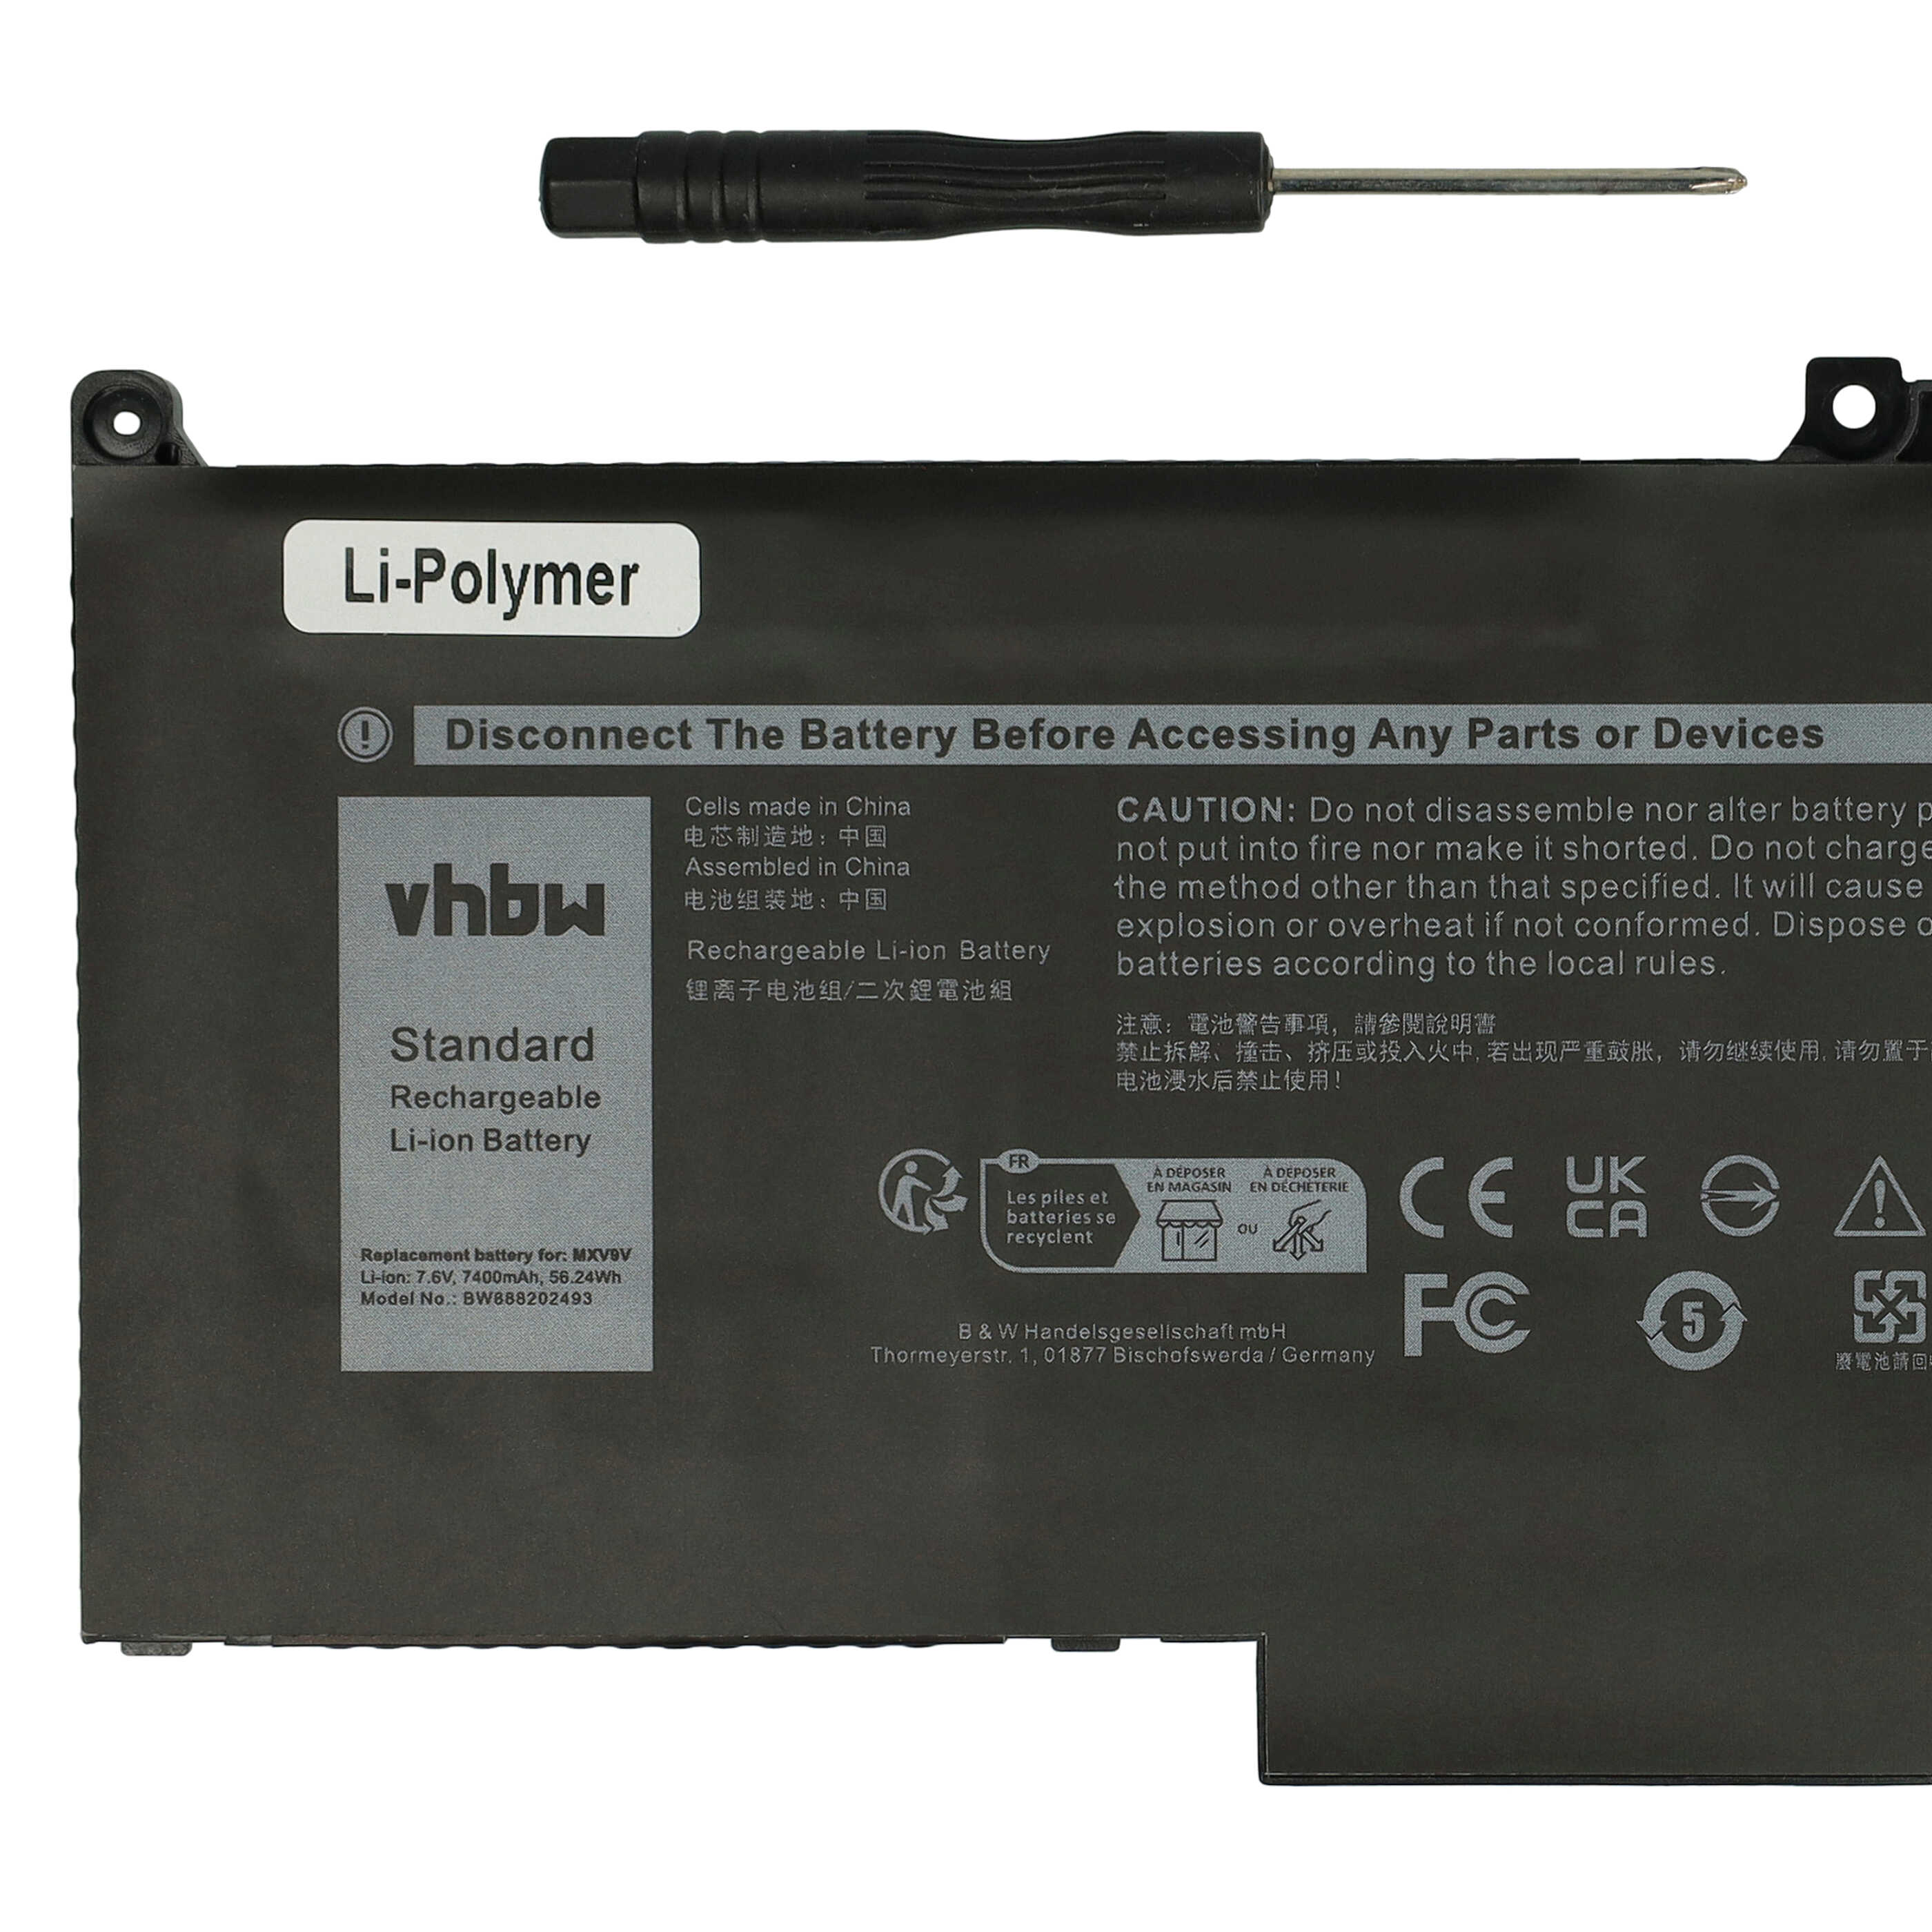 Notebook Battery Replacement for Dell 05VC2M, MXV9V - 7400mAh 7.6V Li-polymer